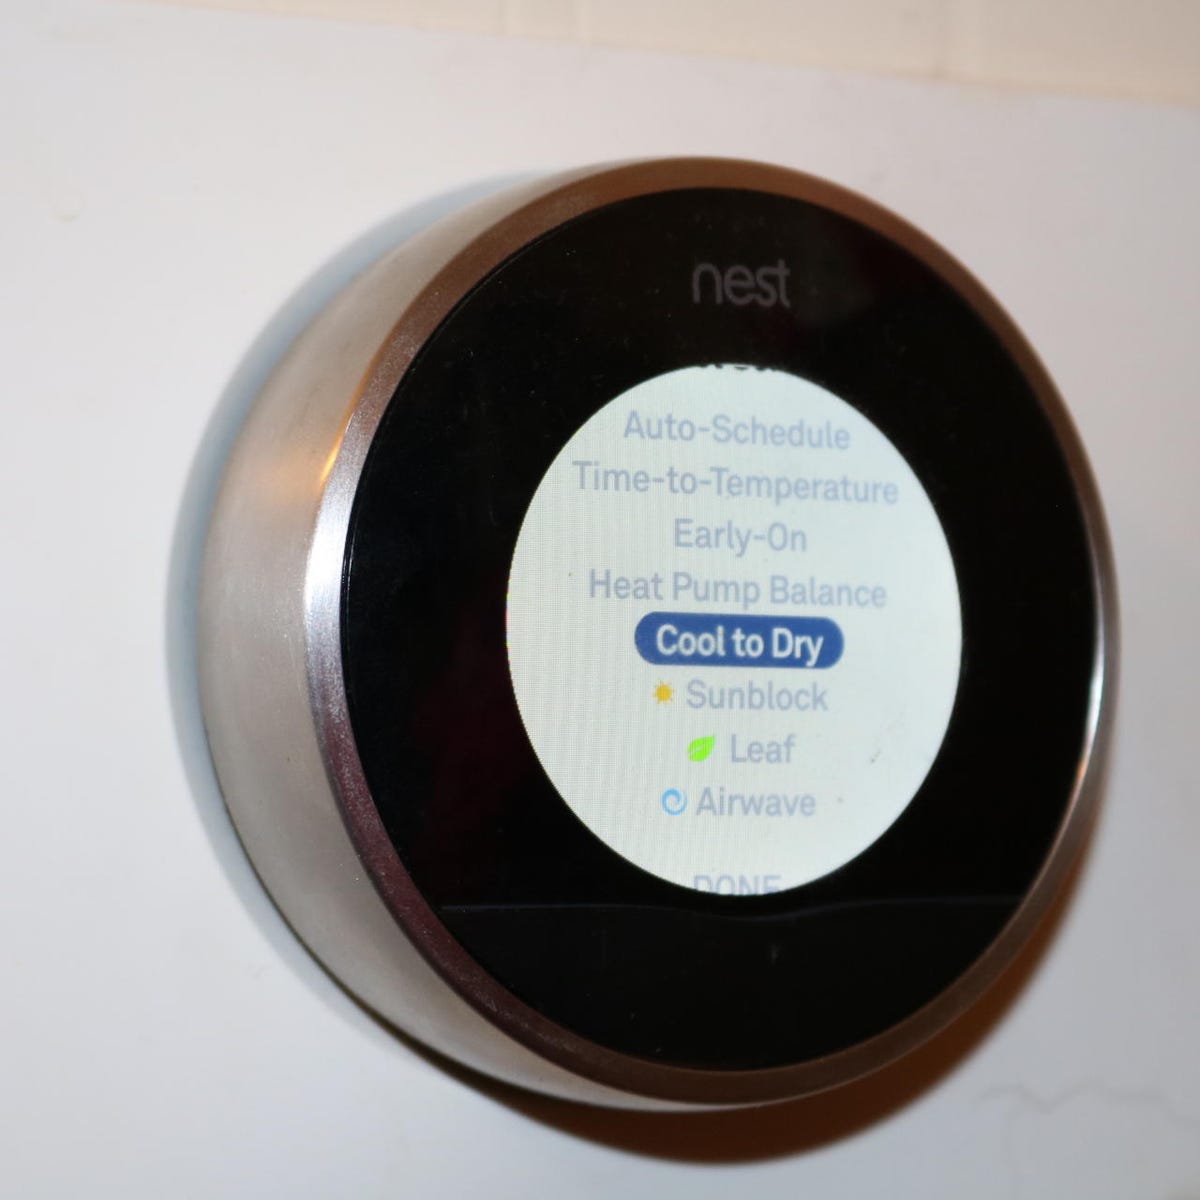 Is your home too humid? Nest thermostat can help - CNET